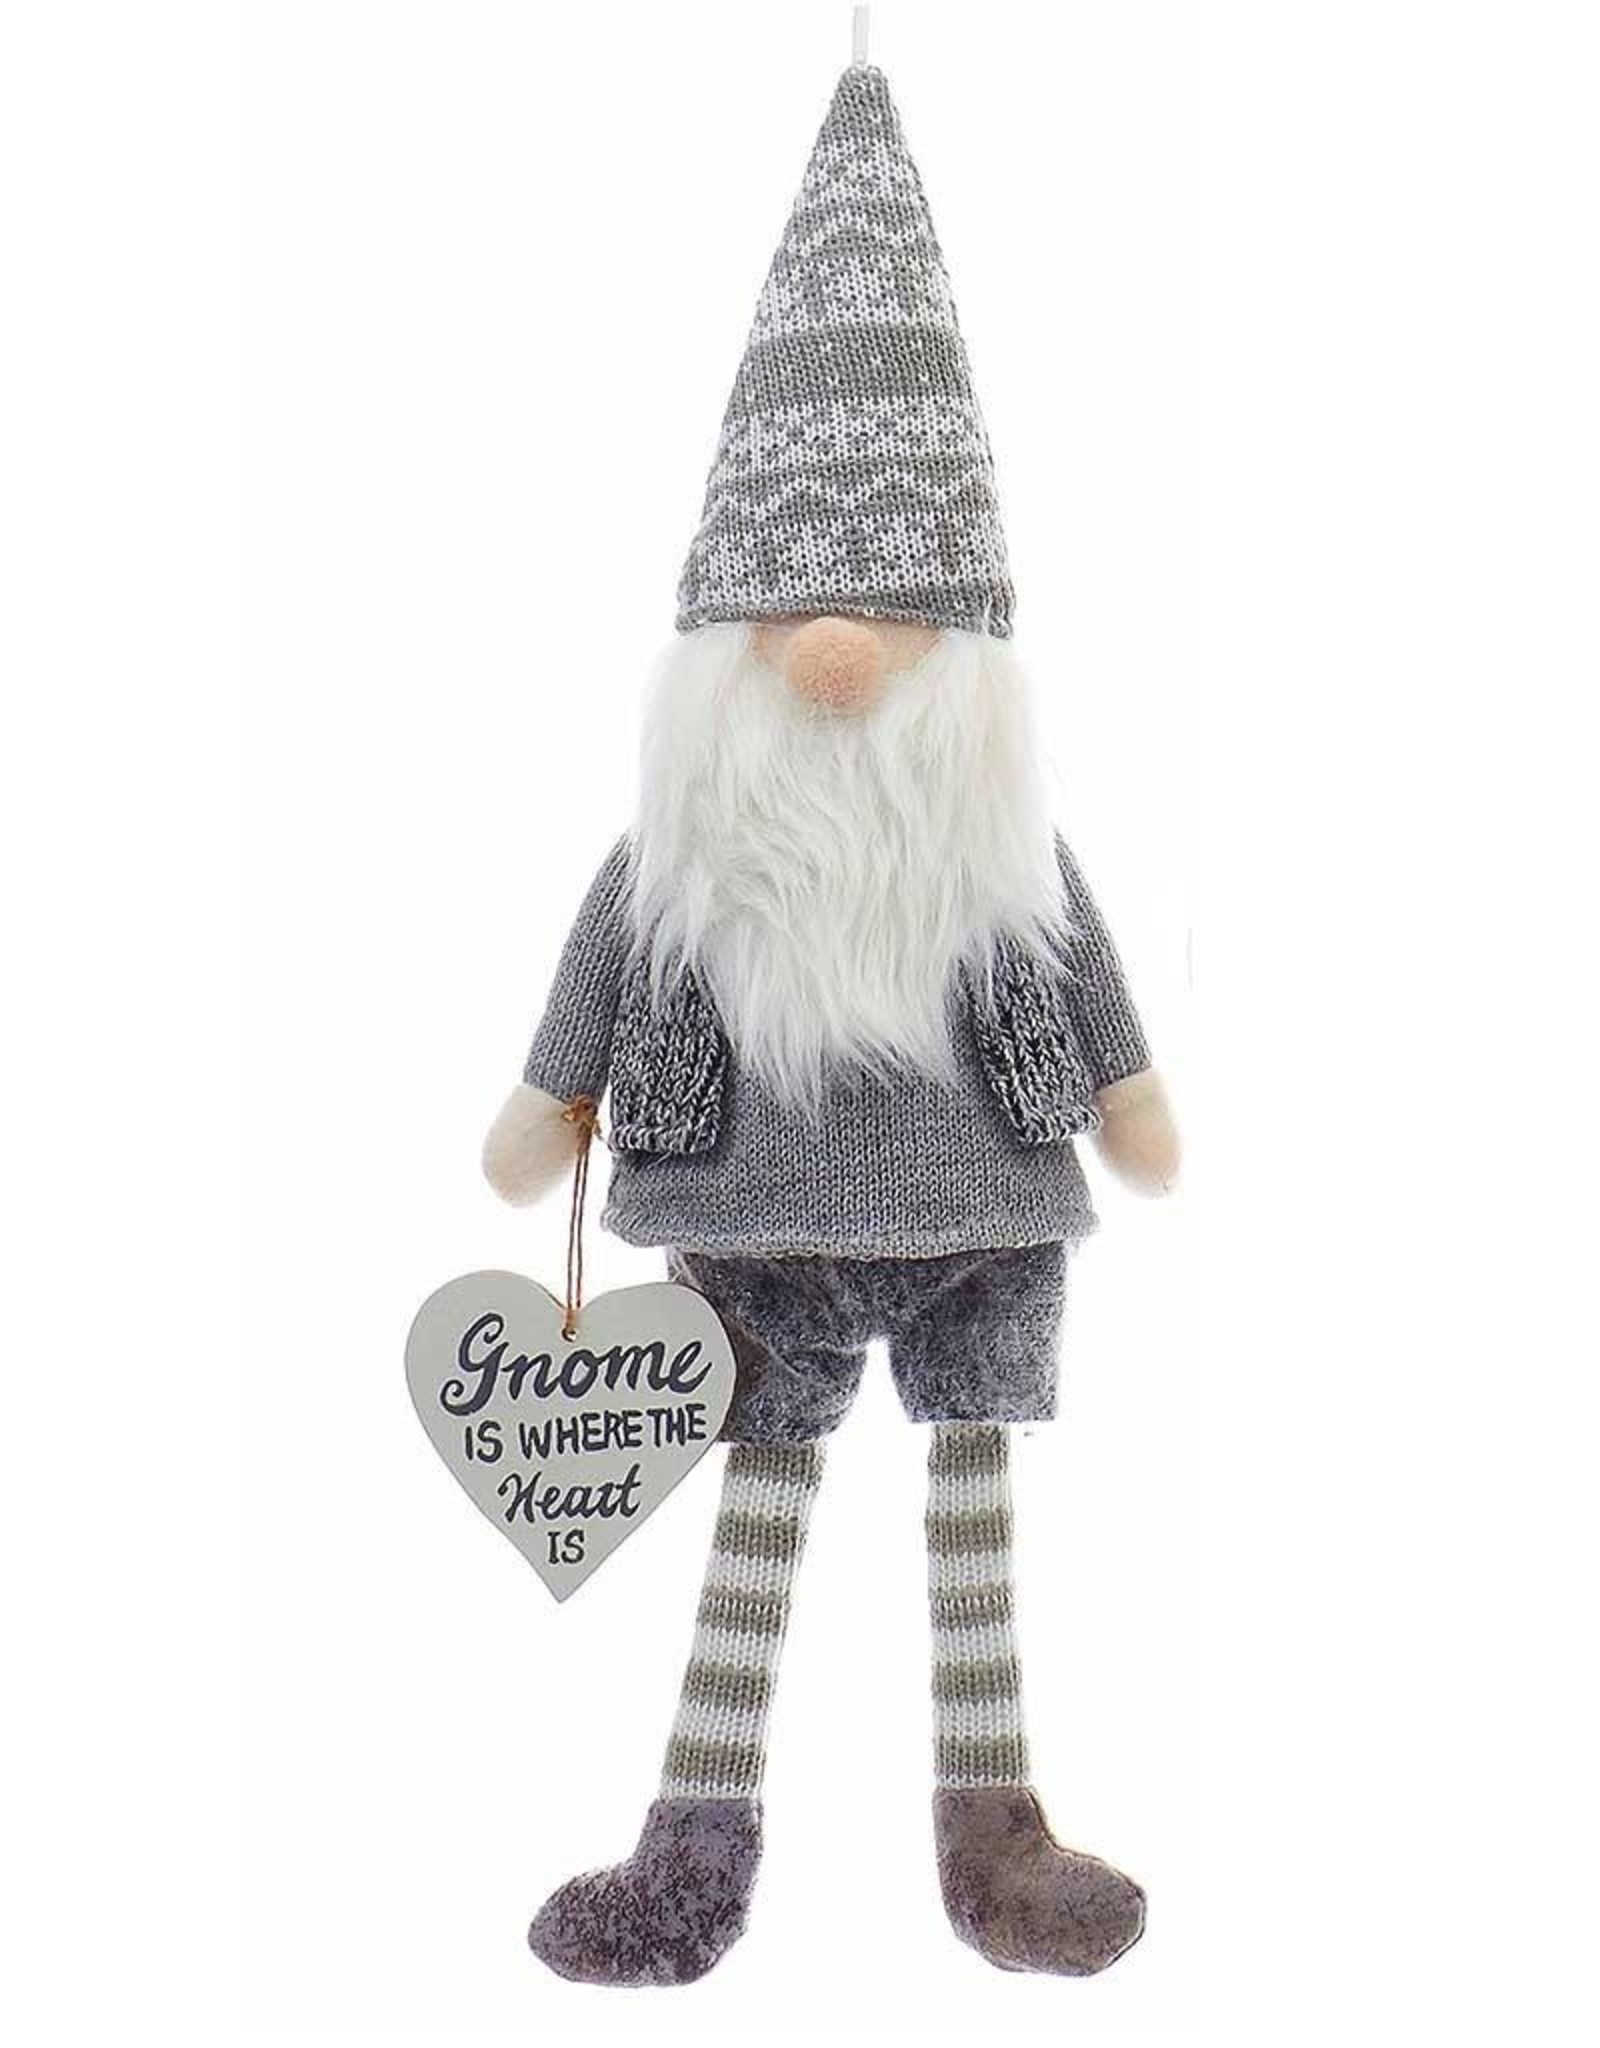 Kurt Adler Gnome Ornament w Heart Sign Gnome Is Where The Heart Is